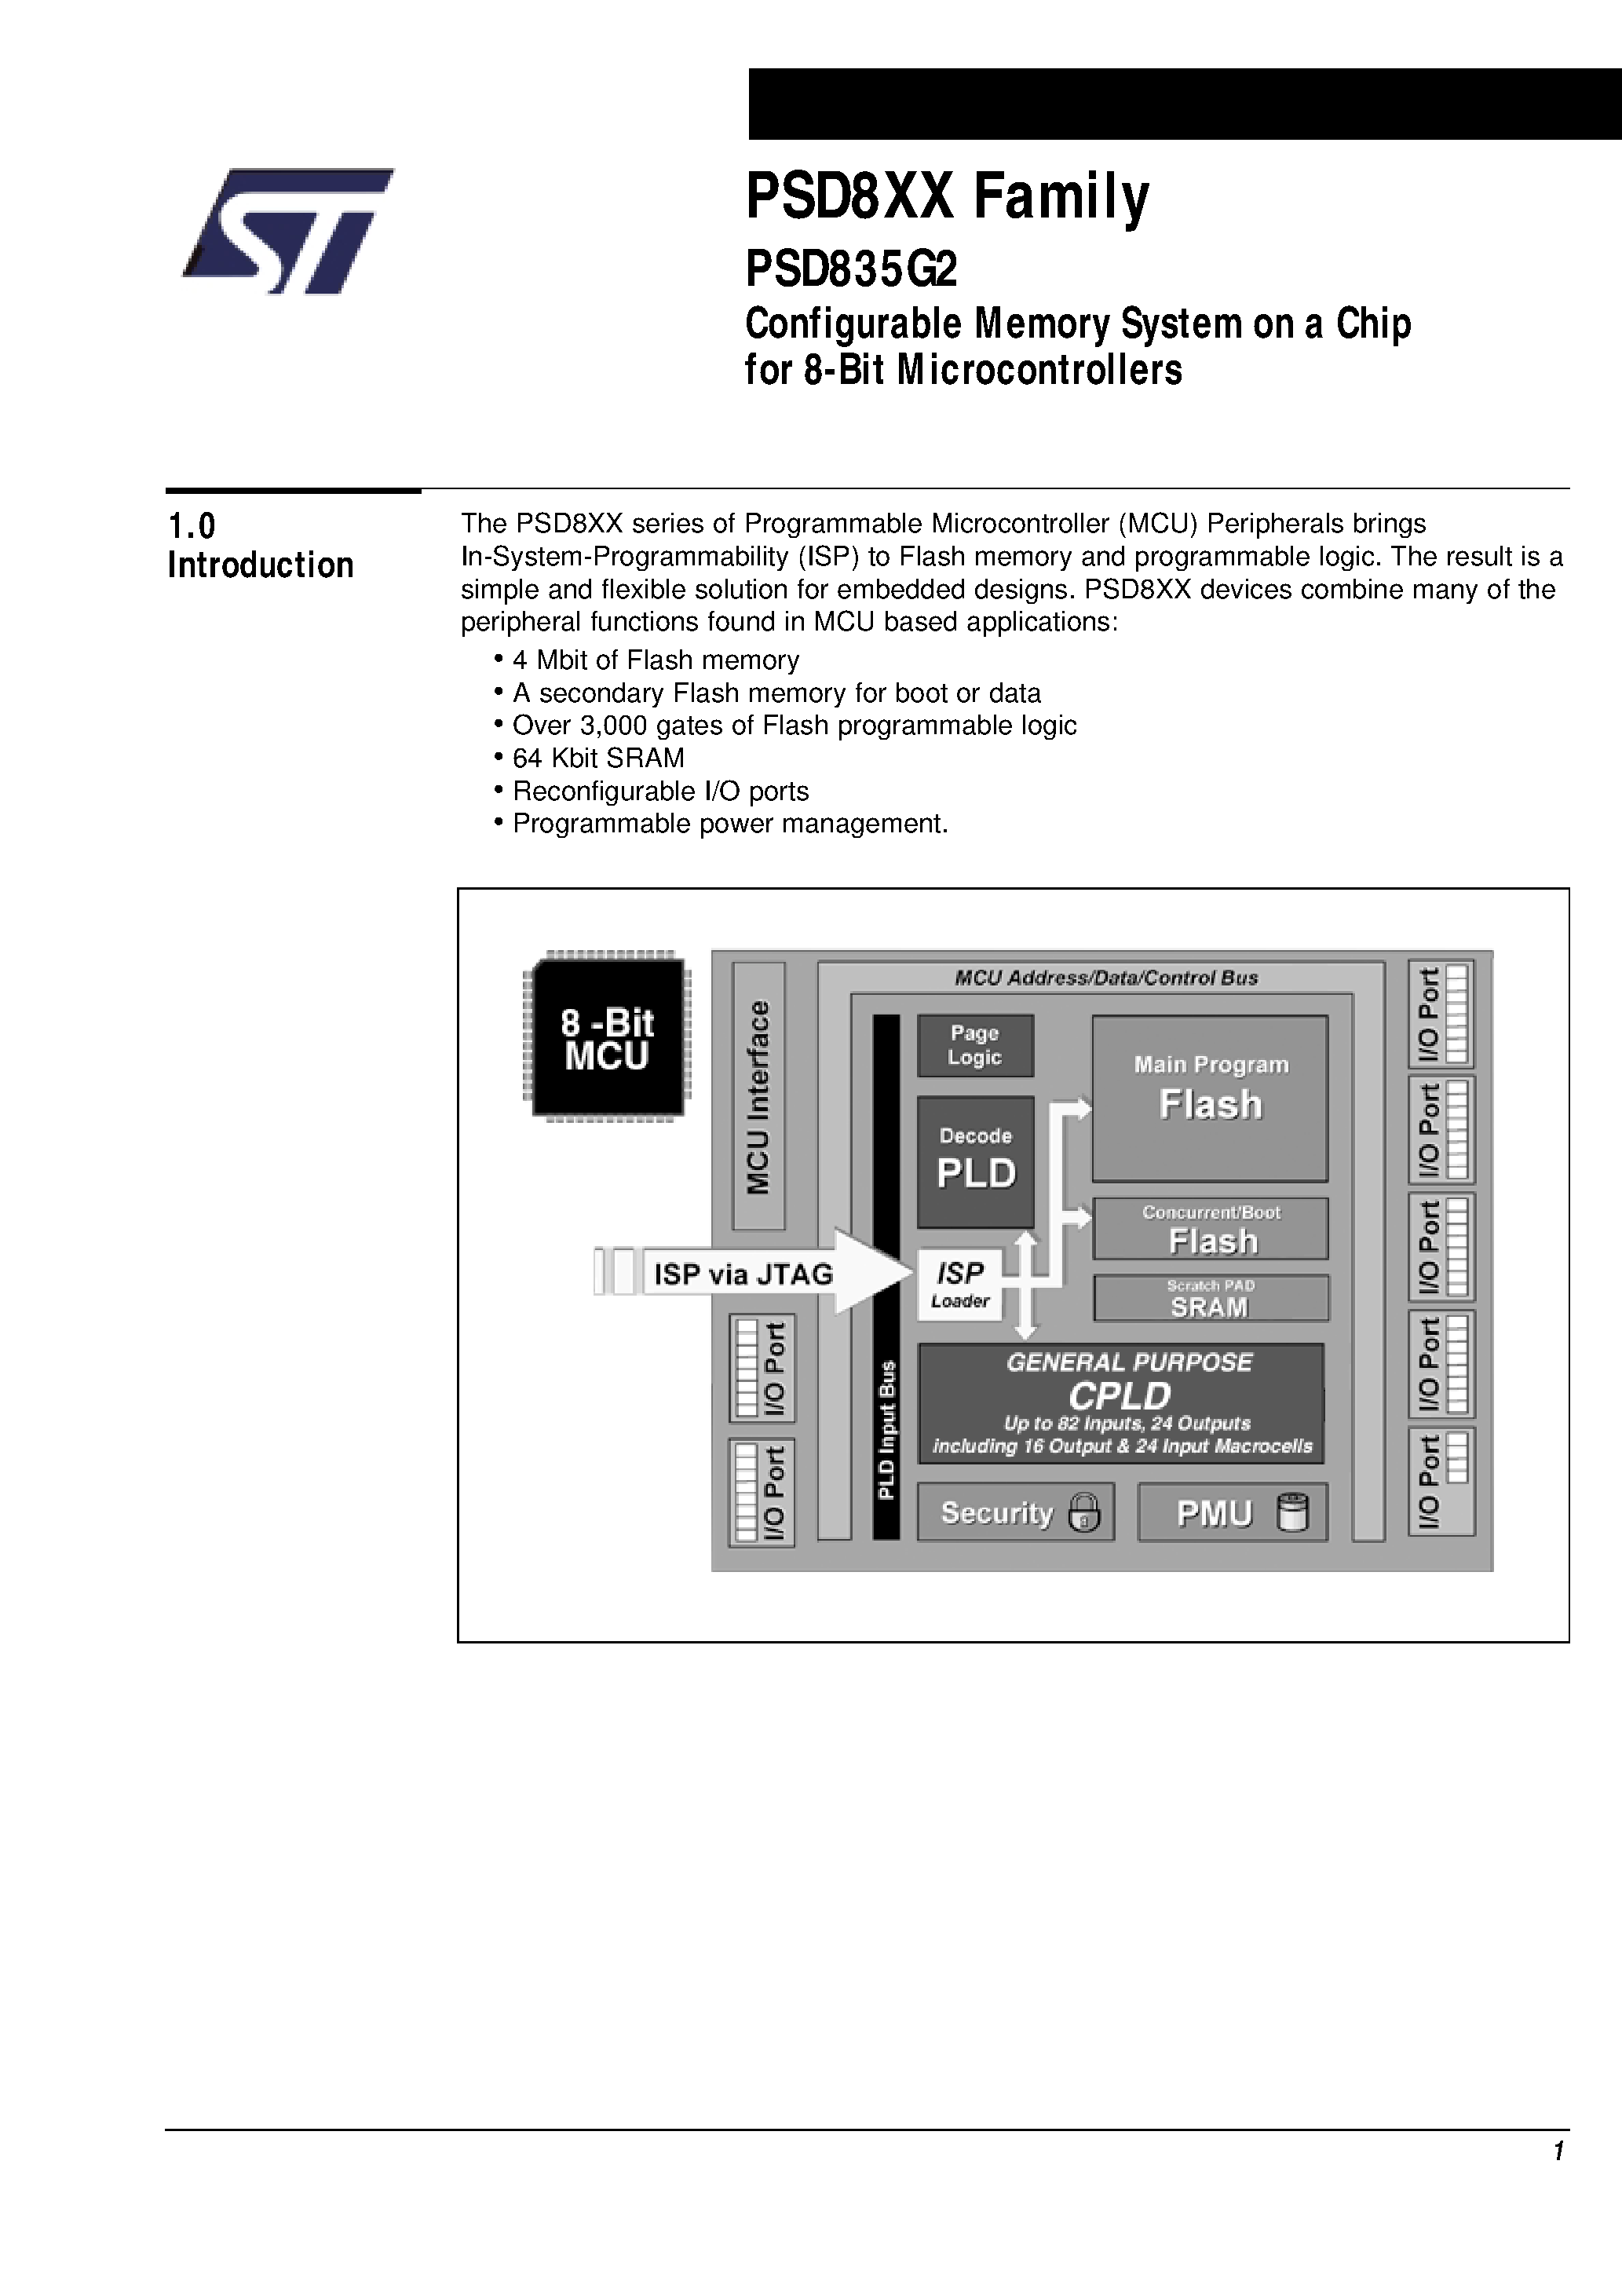 Datasheet PSD835F1-A-20UI - Configurable Memory System on a Chip for 8-Bit Microcontrollers page 2